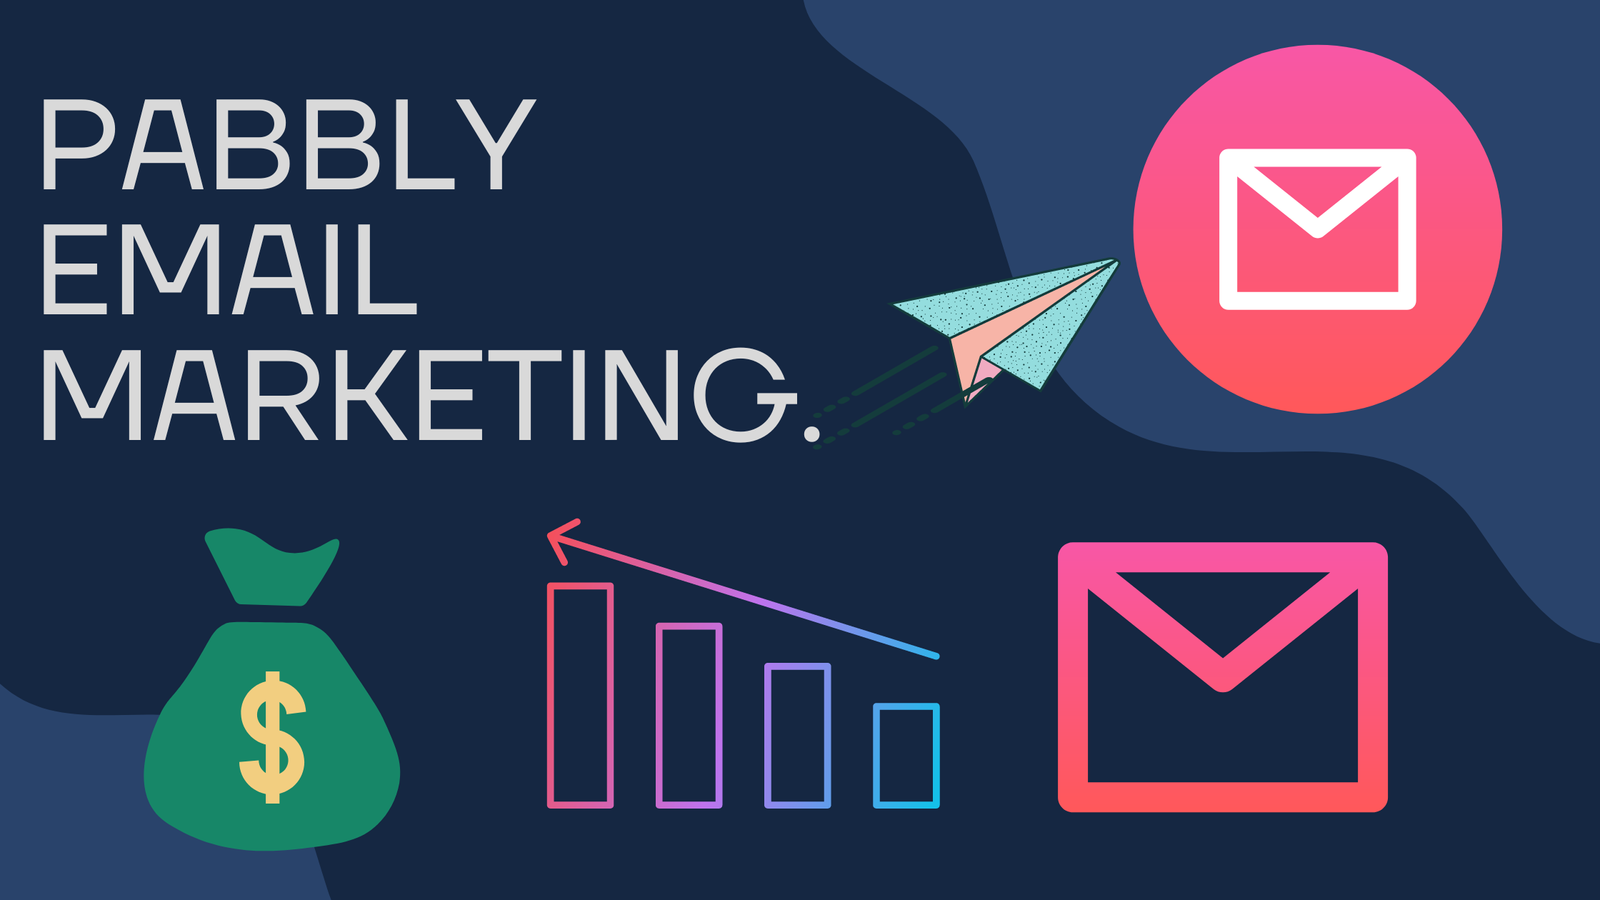 Pabbly Email Marketing (Is This The Best Email Marketing Service